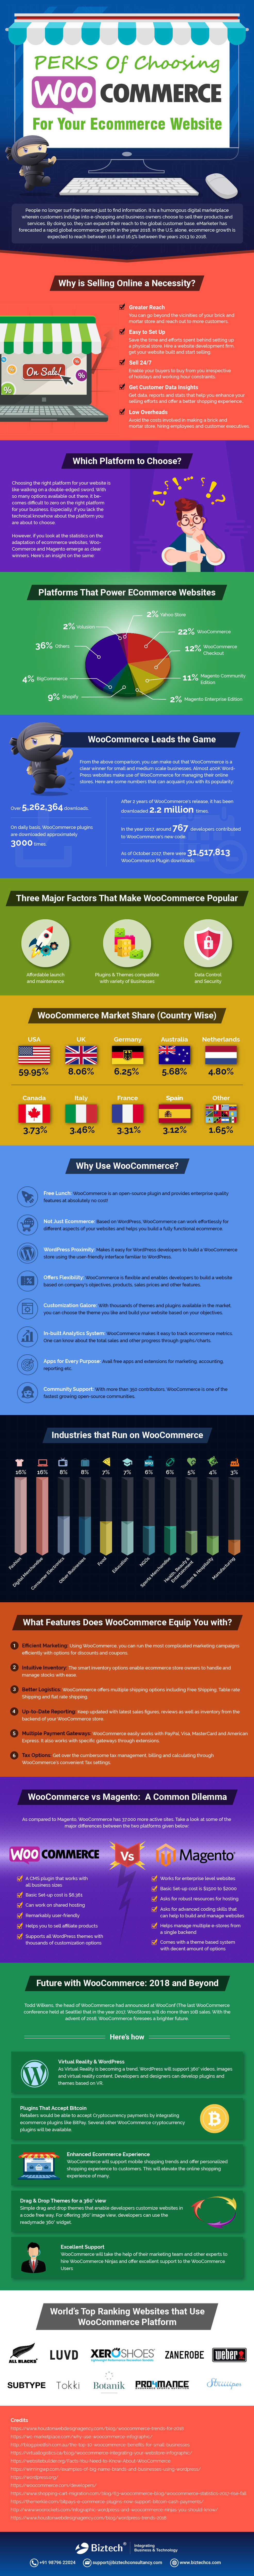 PERKS-Of-Choosing-WooCommerce-For-Your-Ecommerce-Website-An-Infographic